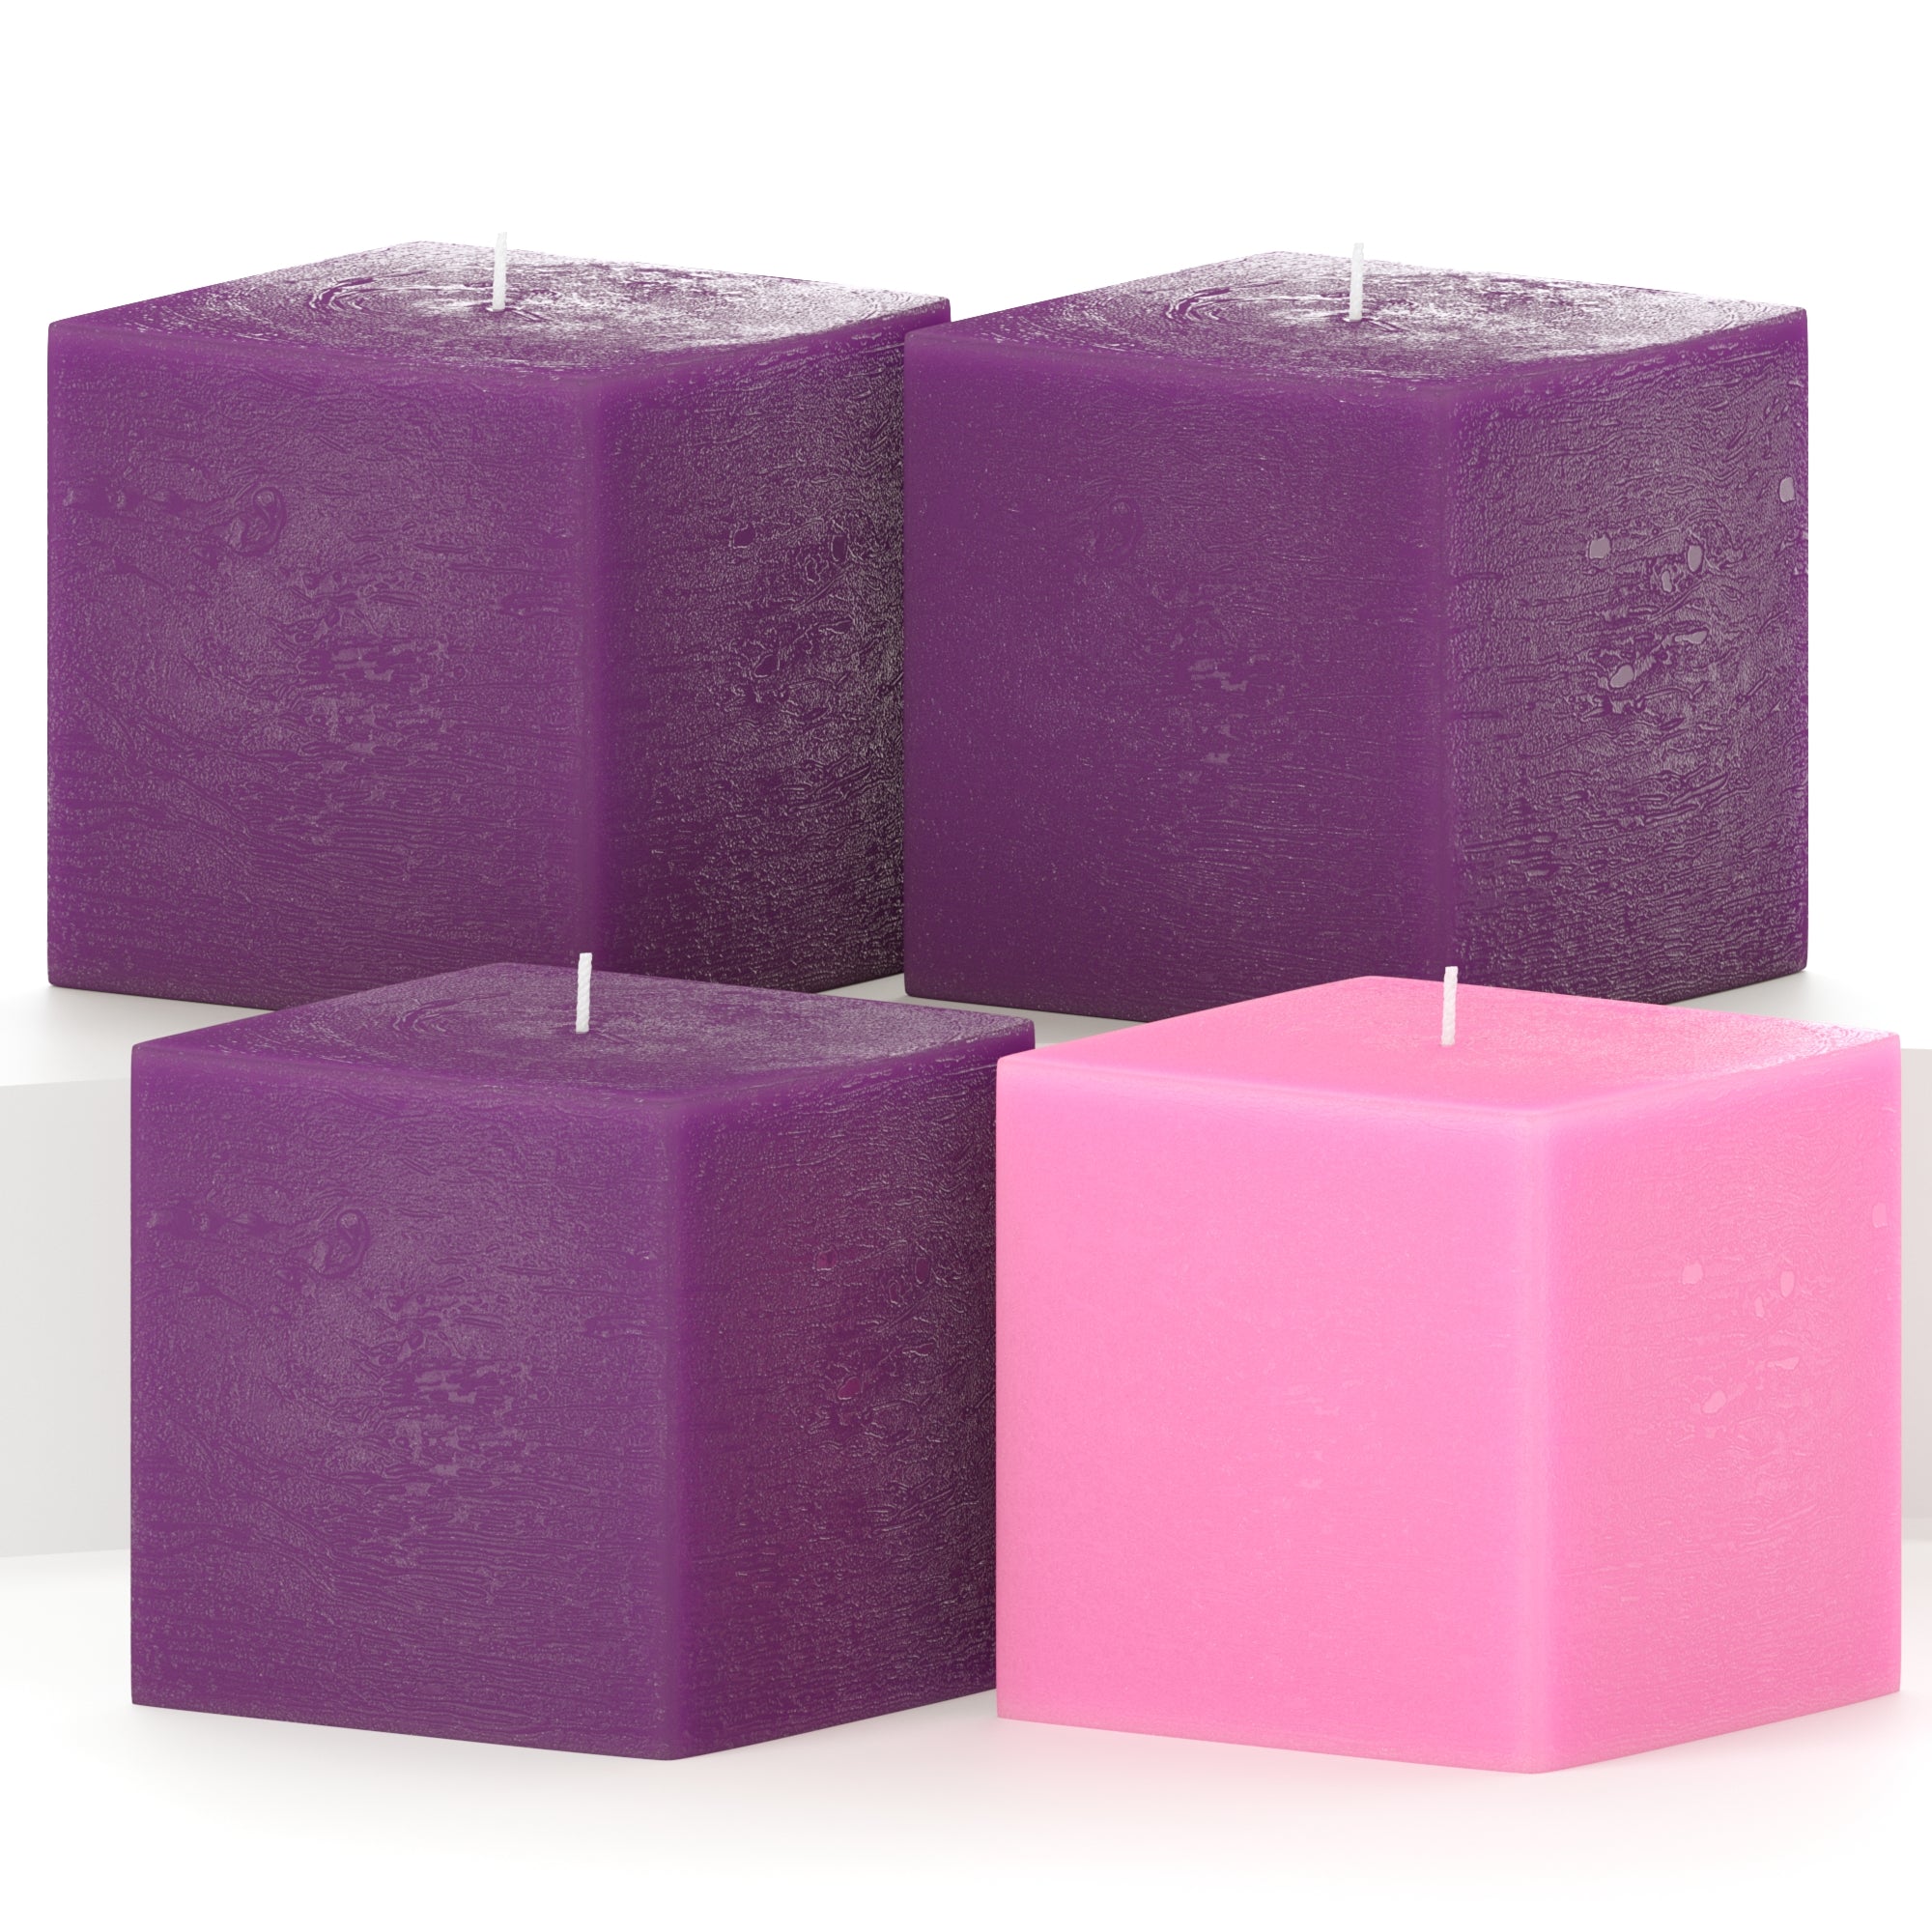 CANDWAX Purple Advent Square Candles 3" - Set of 4 pcs